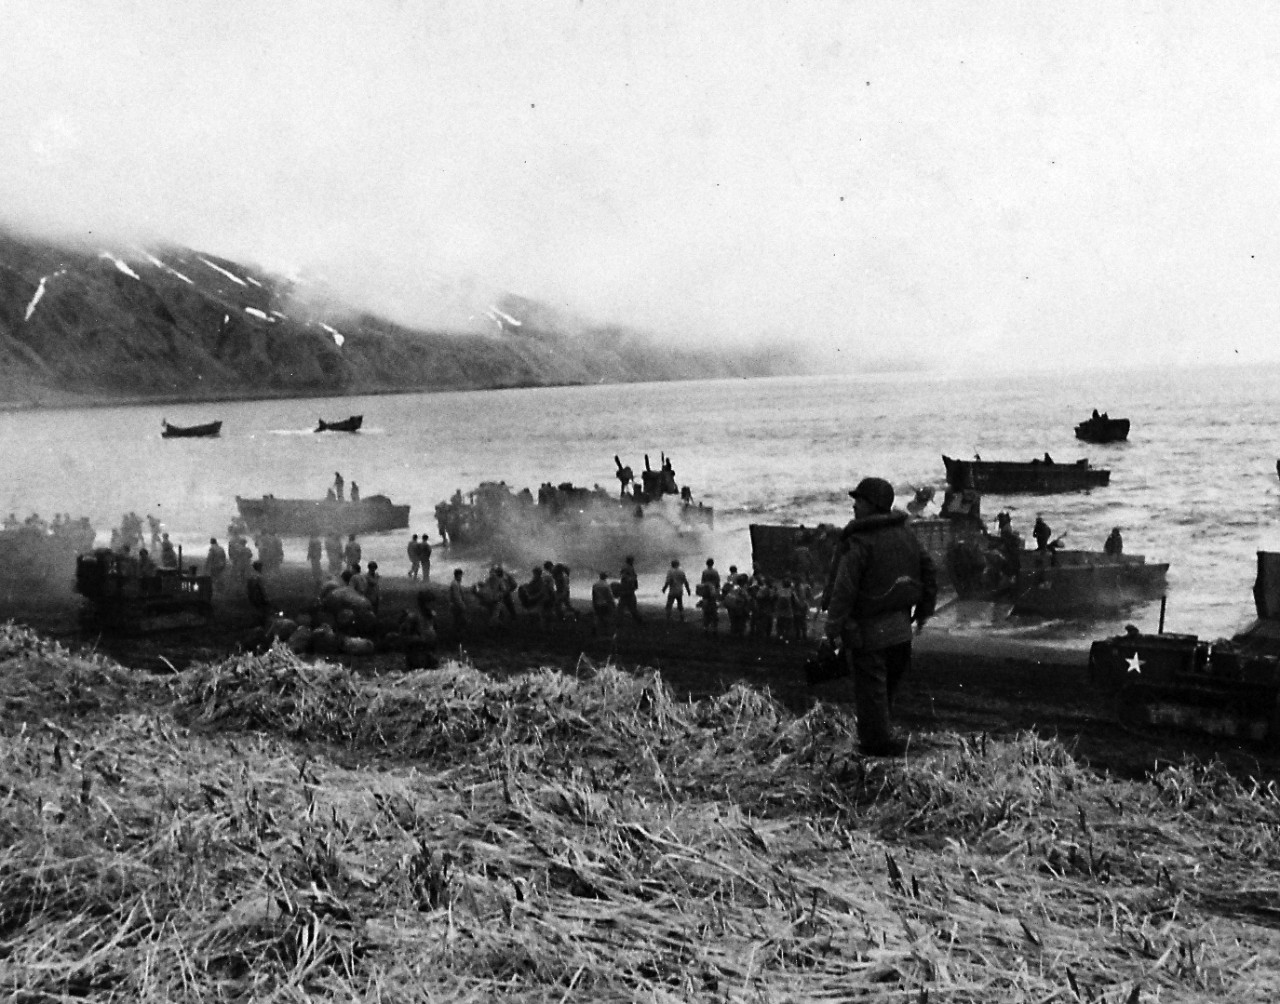 80-G-50855:    Aleutian Islands Campaign, June 1942 - August 1943.   Battle for Attu, May 1943.  Landing craft arriving at beach on Massacre Bay and being unloaded, May 12, 1943.   U.S. Navy Photograph, now in the collections of the National Archives.  (2016/05/10).